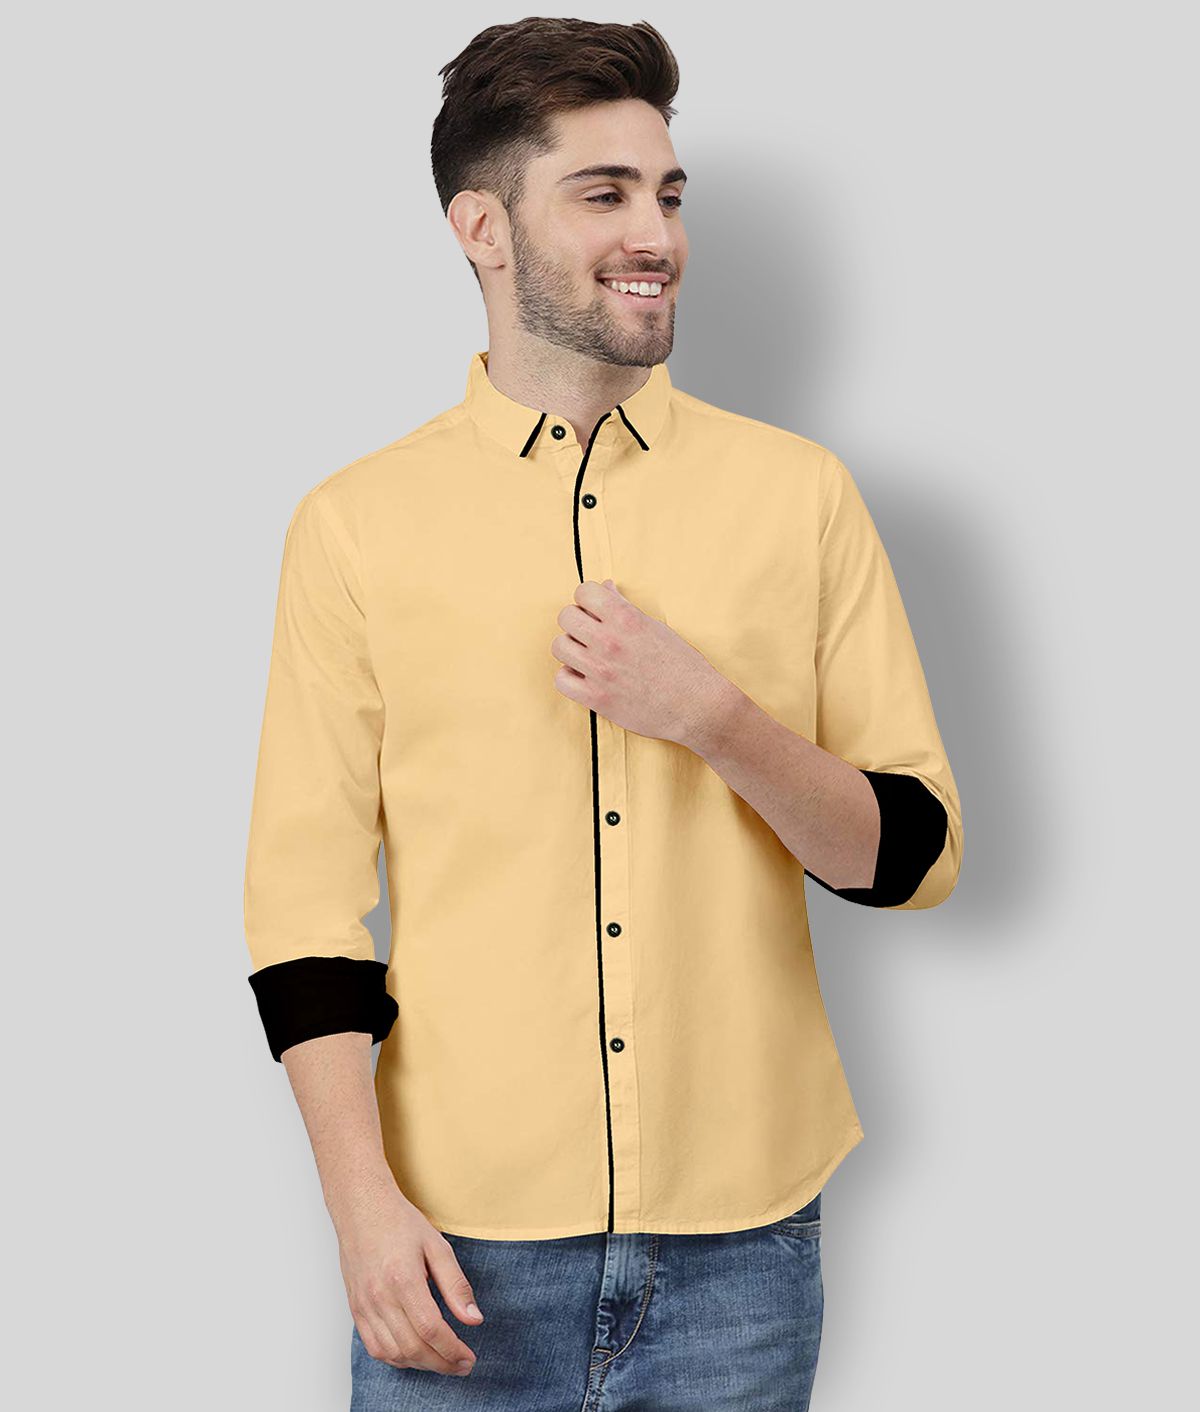     			P&V CREATIONS - Yellow Cotton Blend Regular Fit Men's Casual Shirt (Pack of 1)